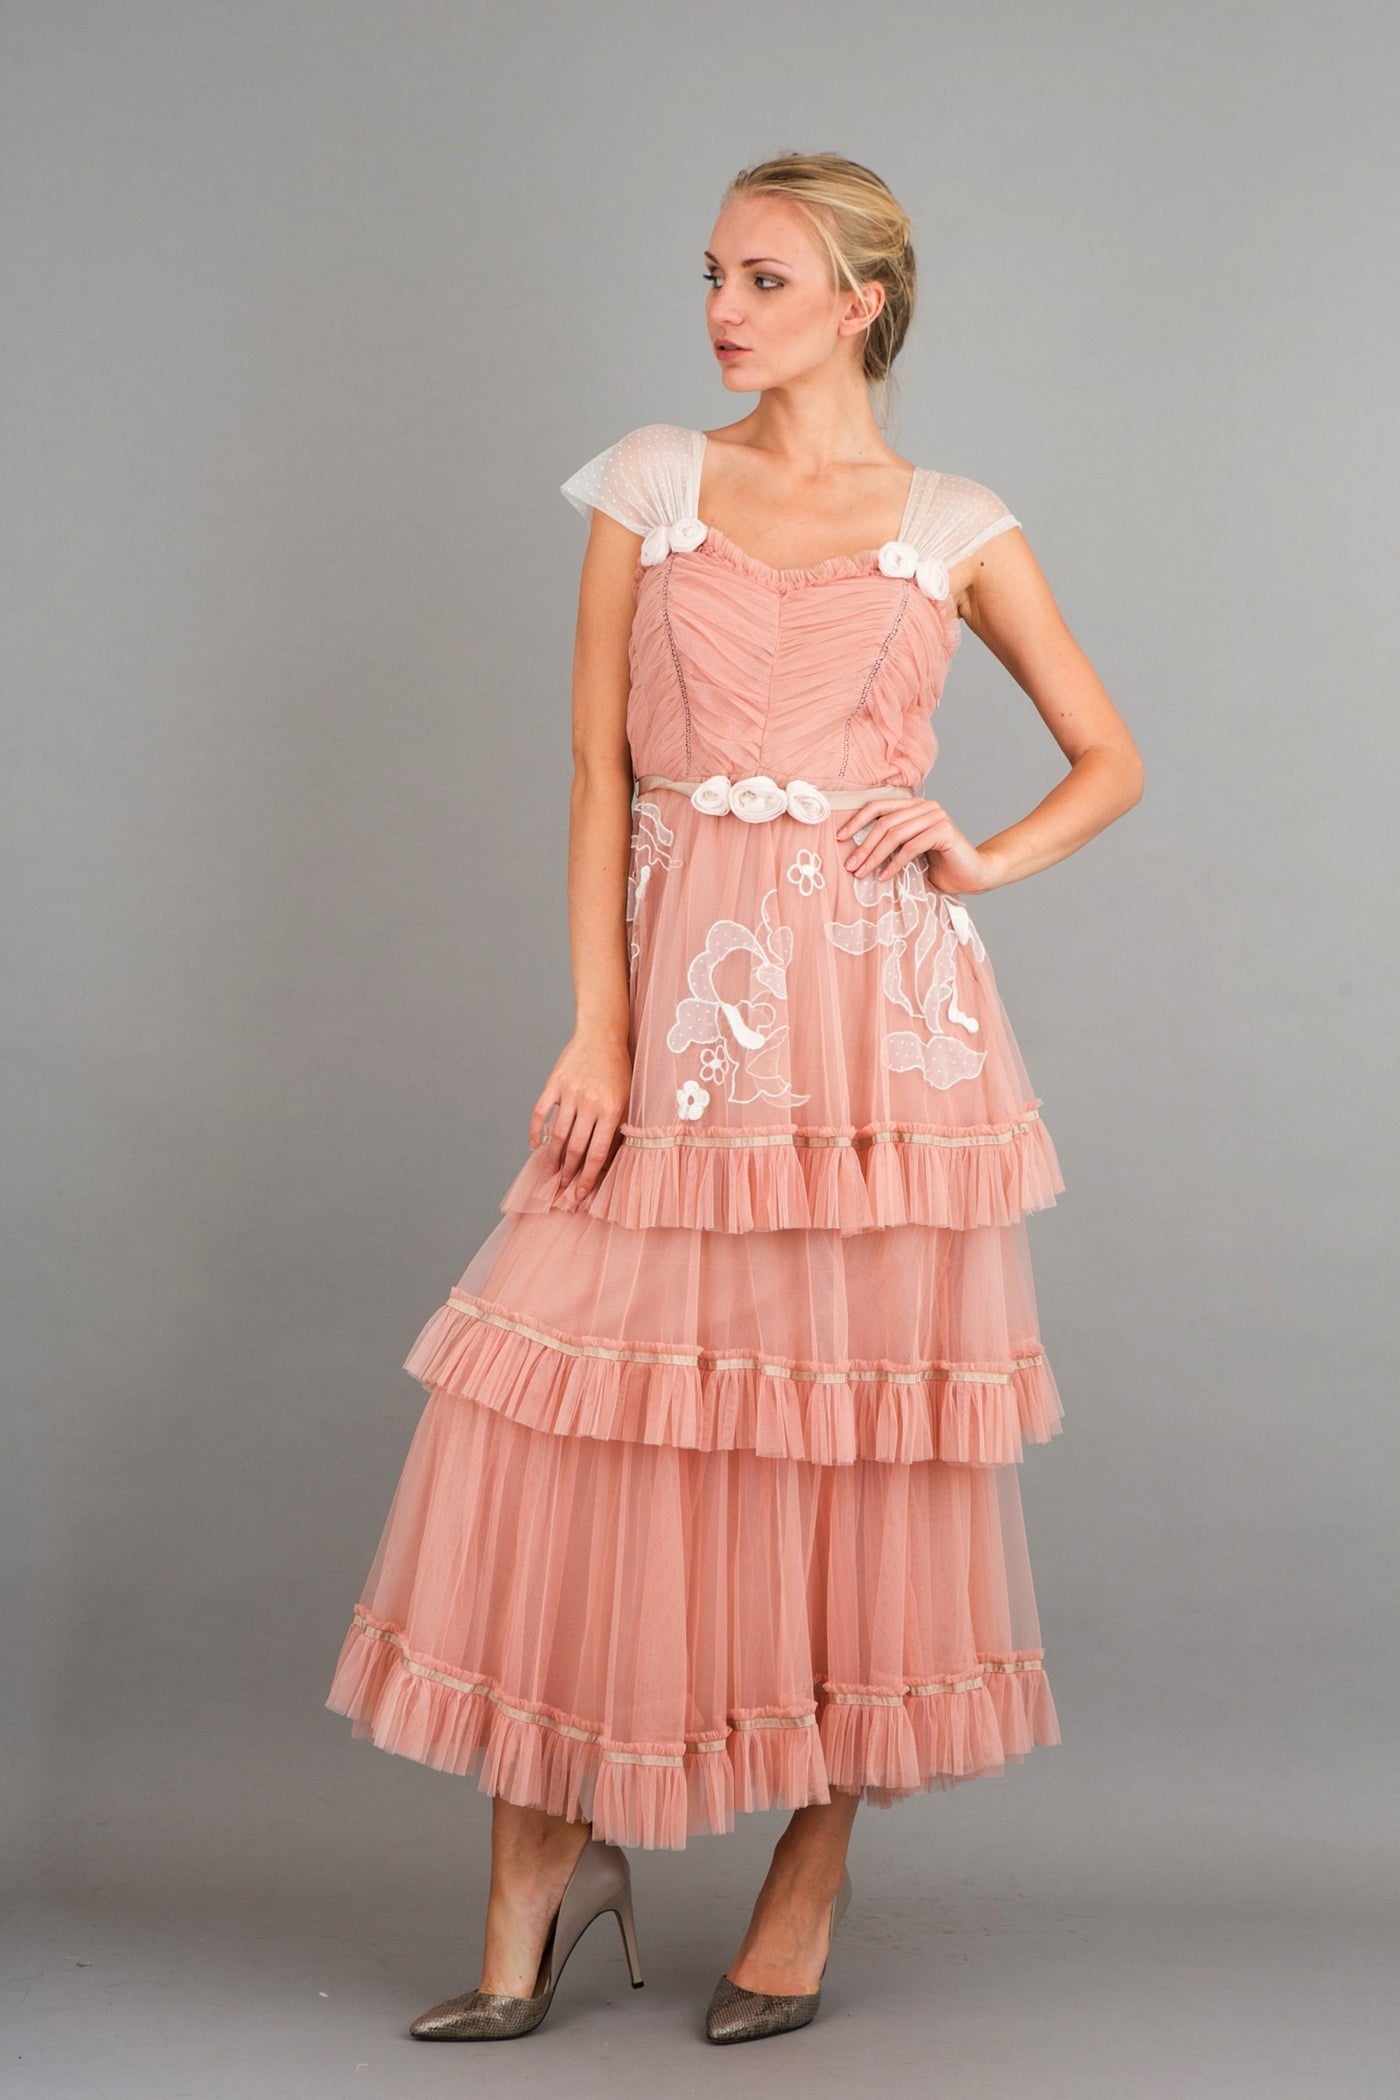 Romantic Frilled Vintage Inspired Tea Party Dress in Pink by Nataya - SOLD OUT